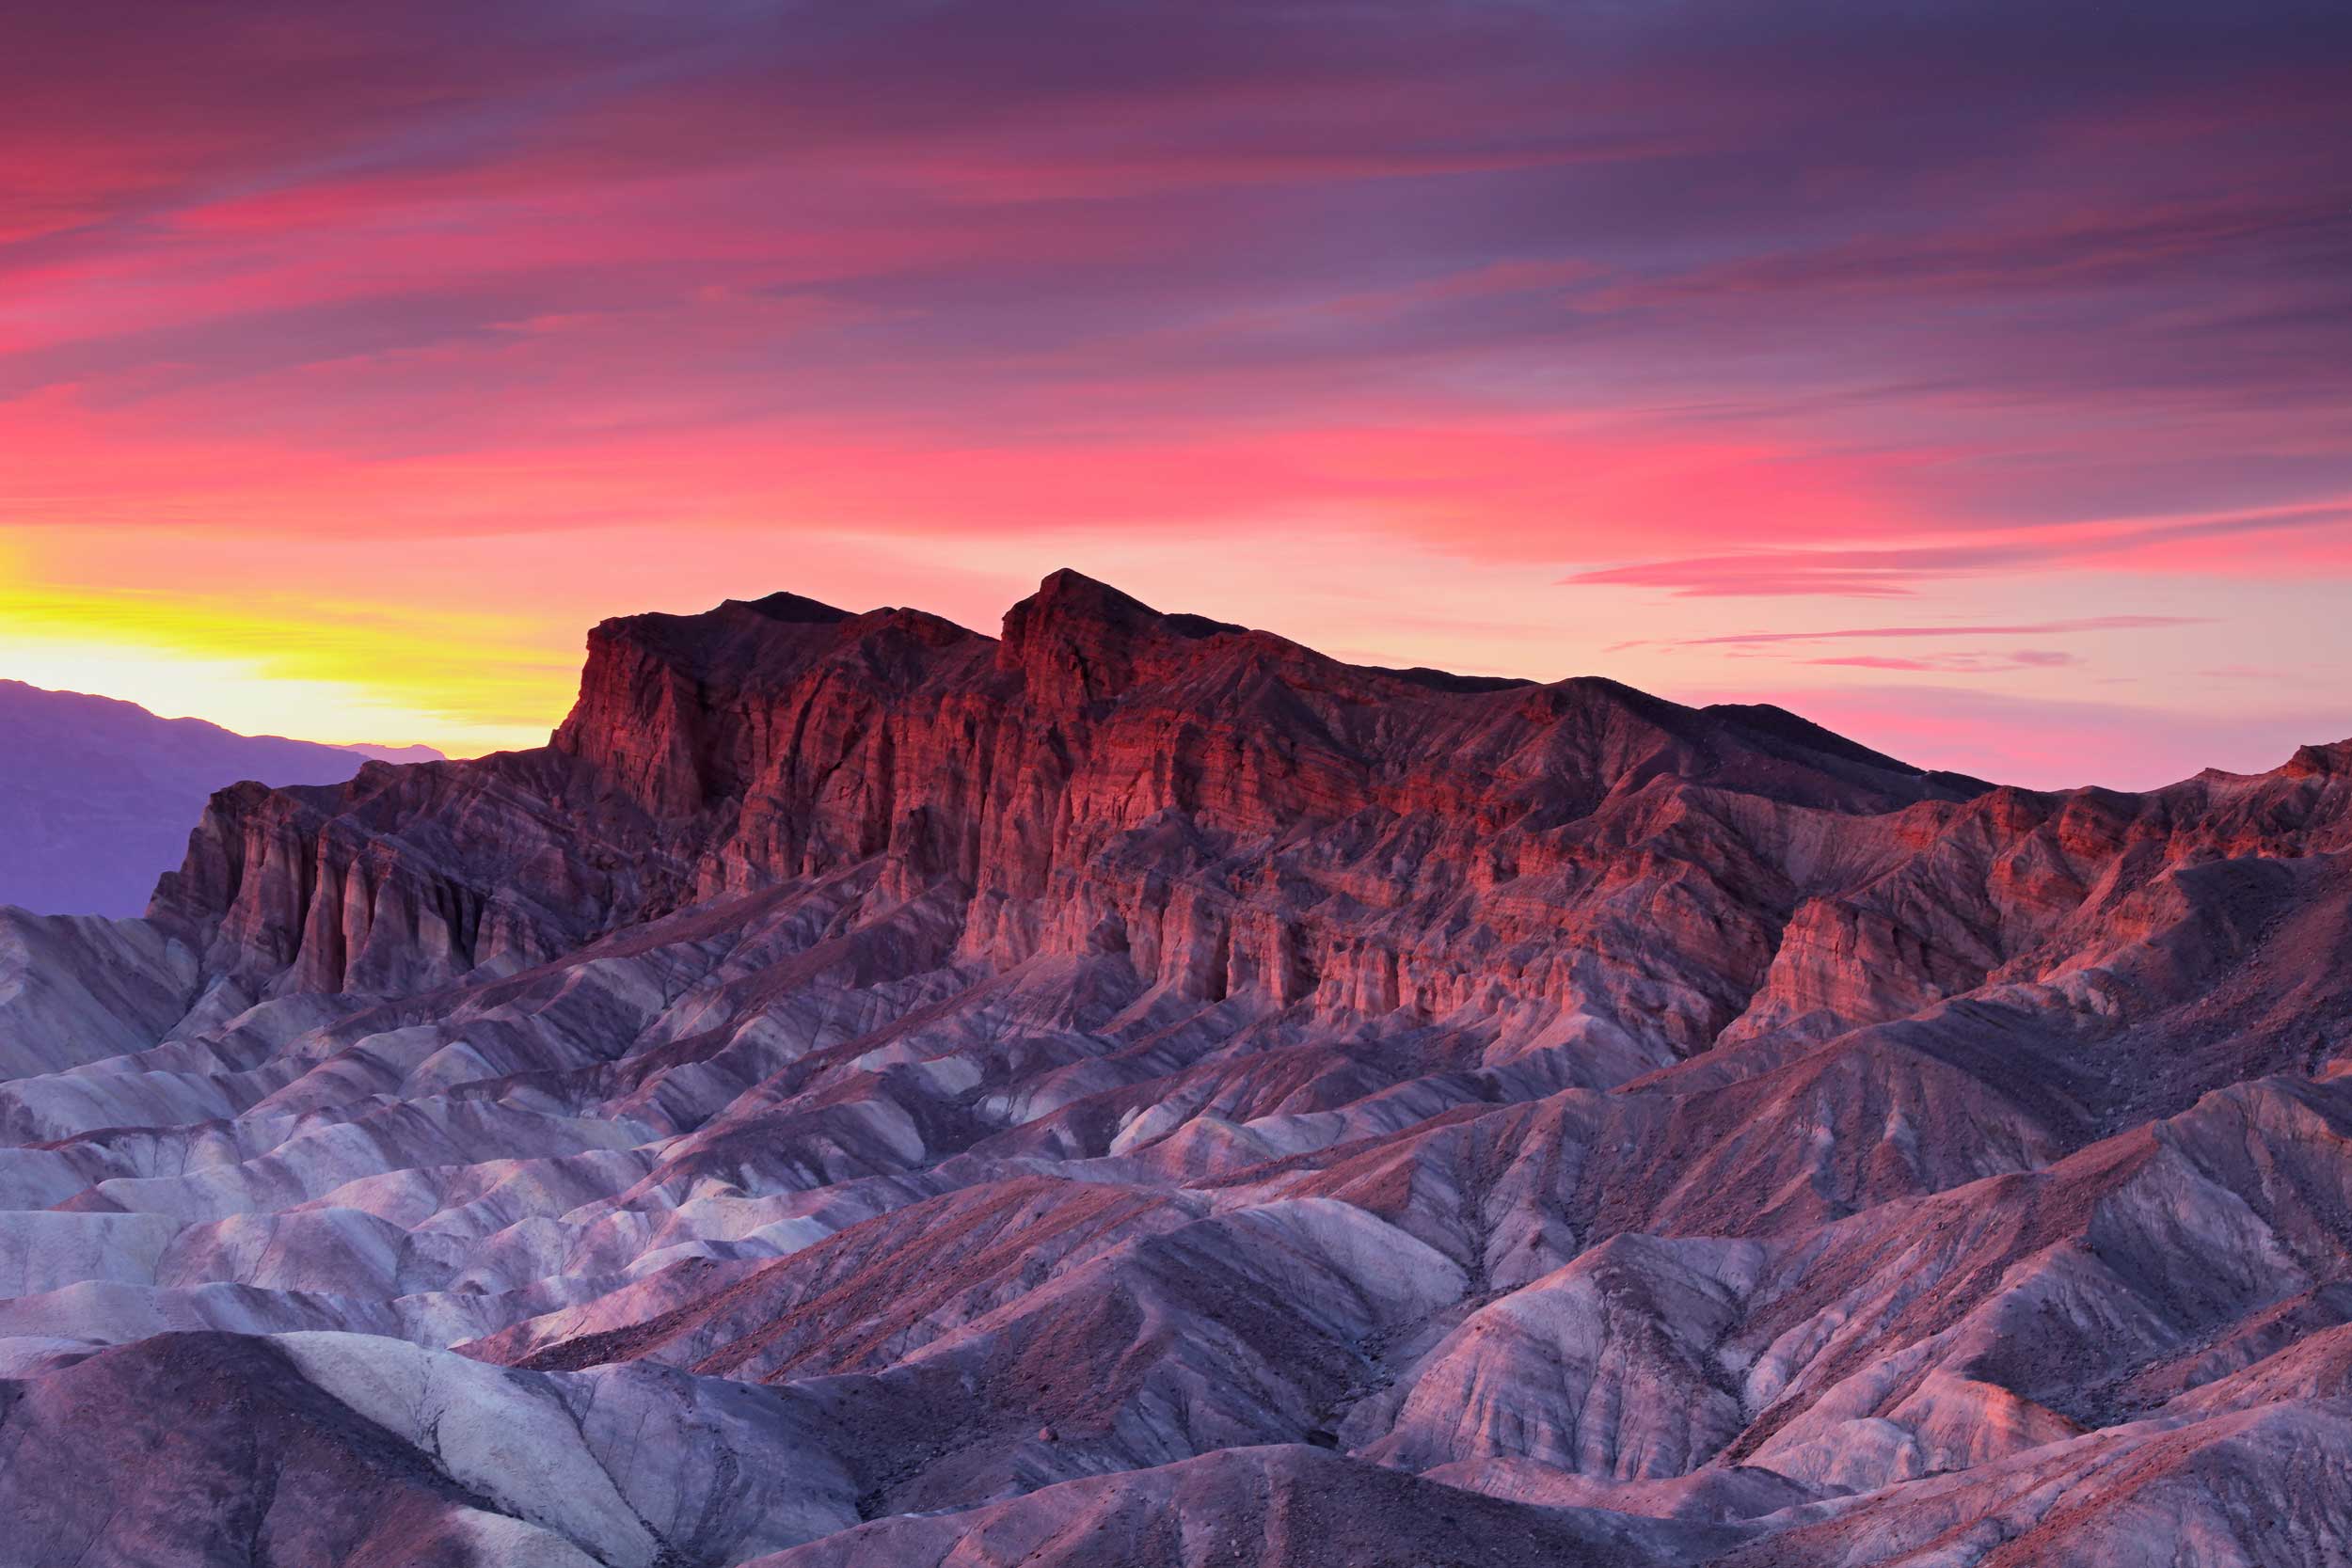 A view of the craggy landscape of Death Valley, USA